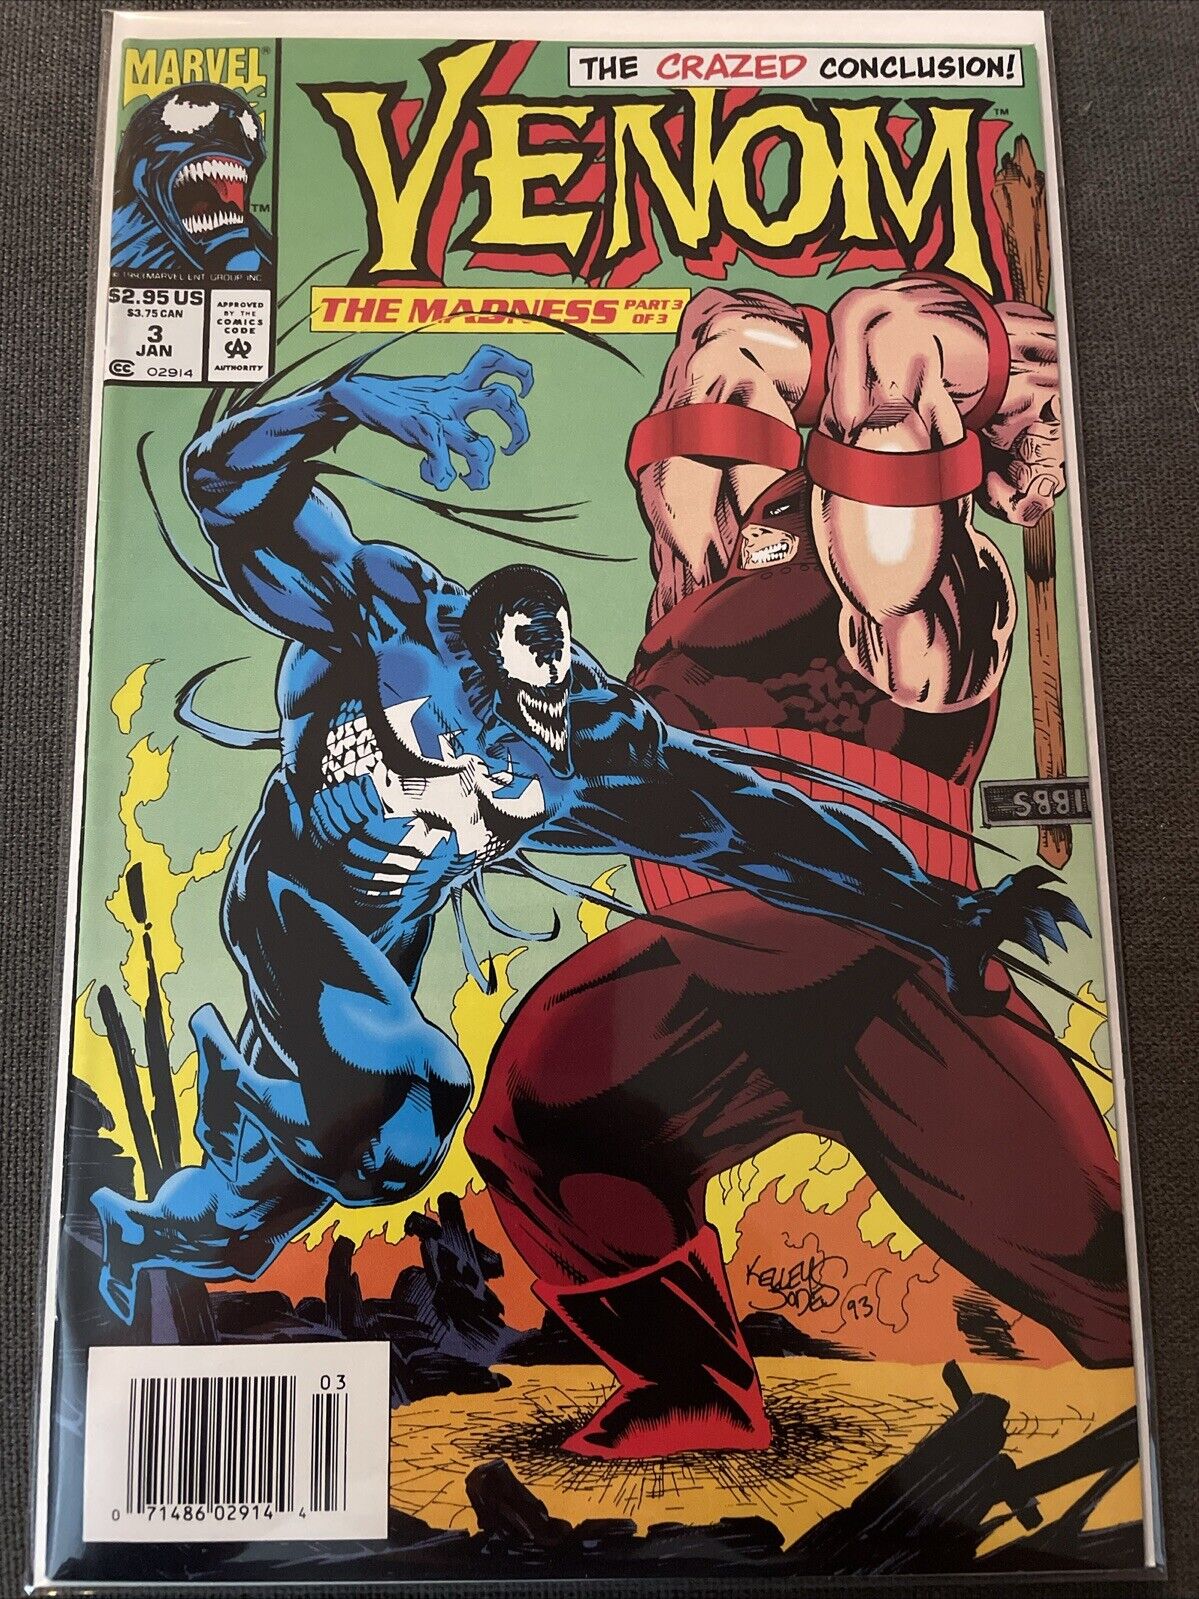 Marvel - VENOM: THE MADNESS #3 (Great Condition) bagged and boarded